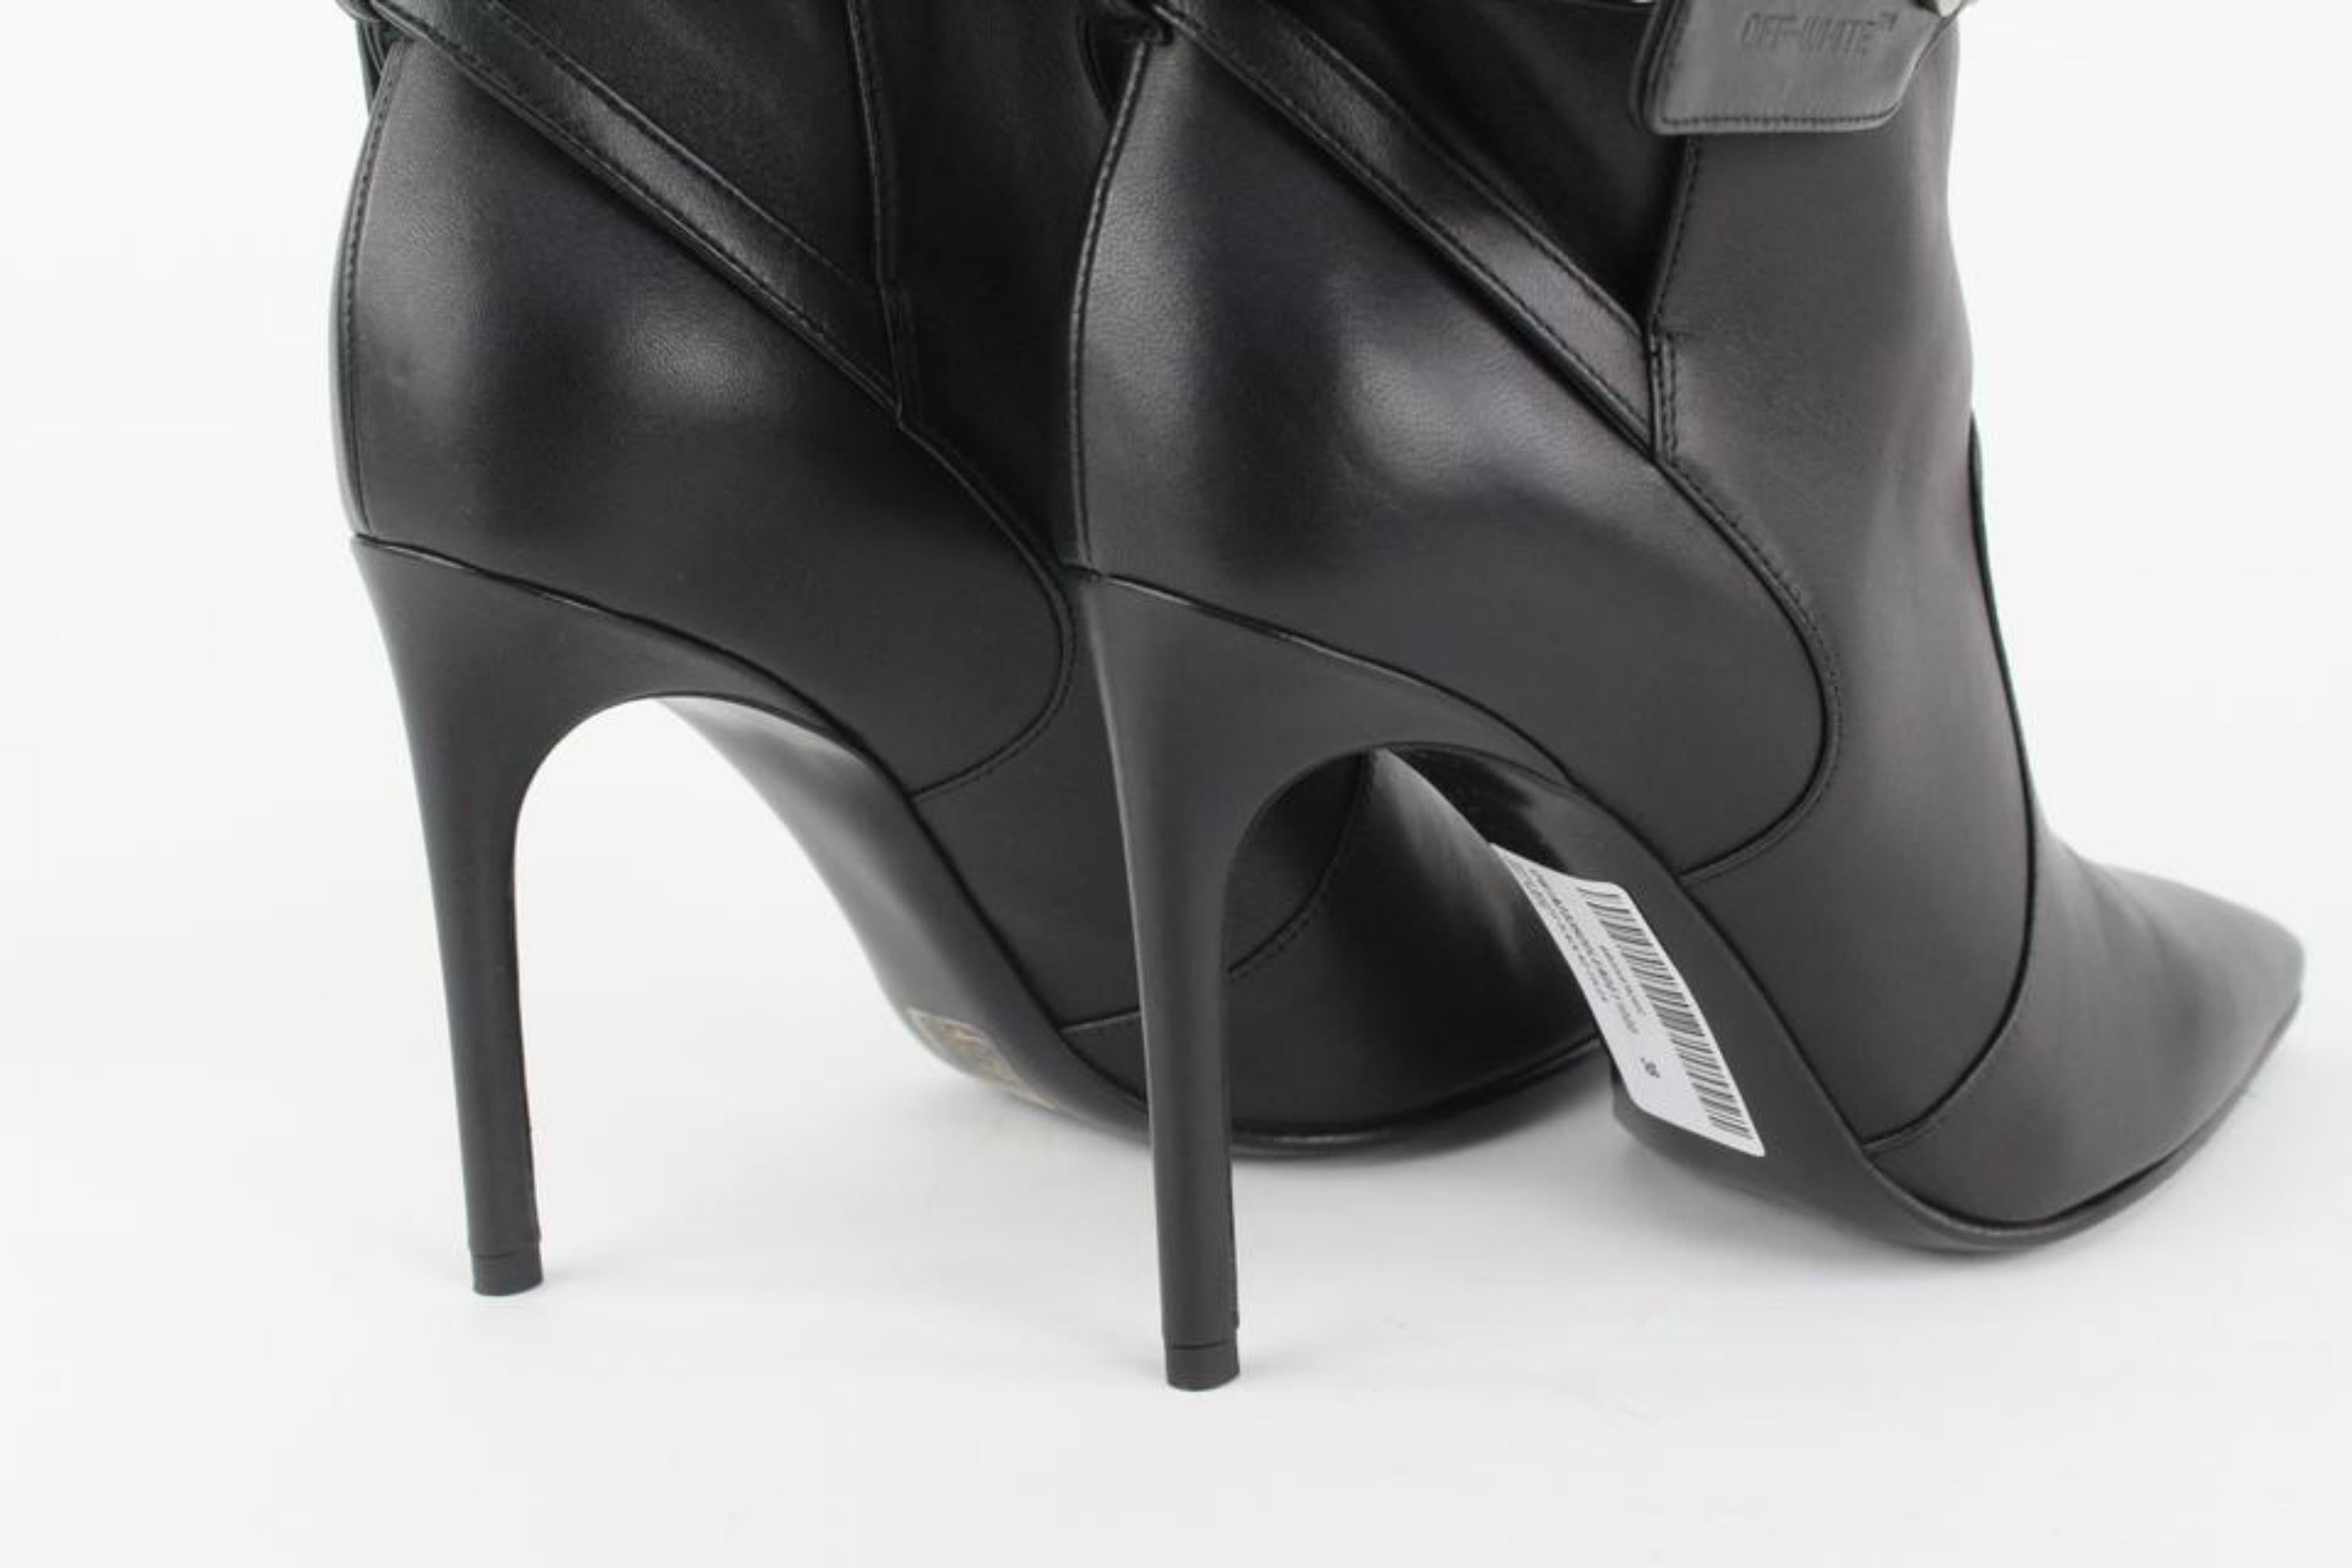 Off-White Sz 38 Black Leather Ziptie Bootie 106of14 For Sale 3